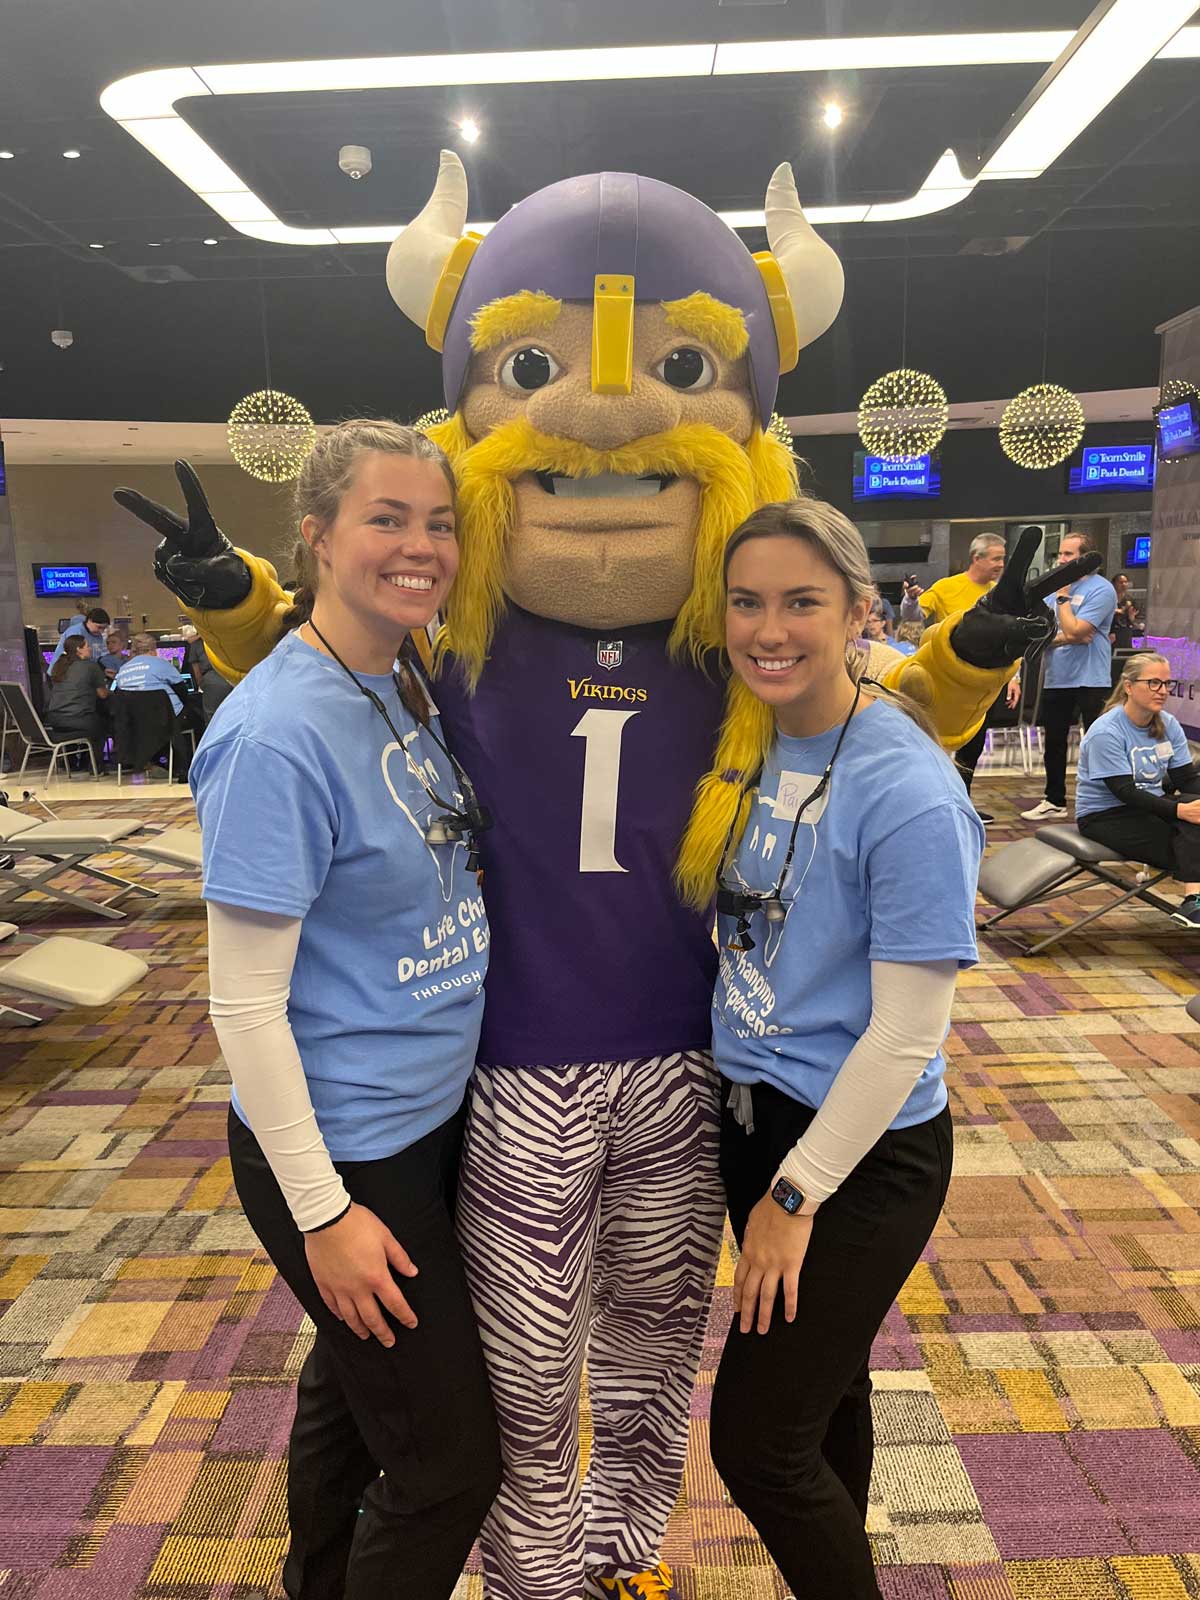 Two DH students with Vikings mascot